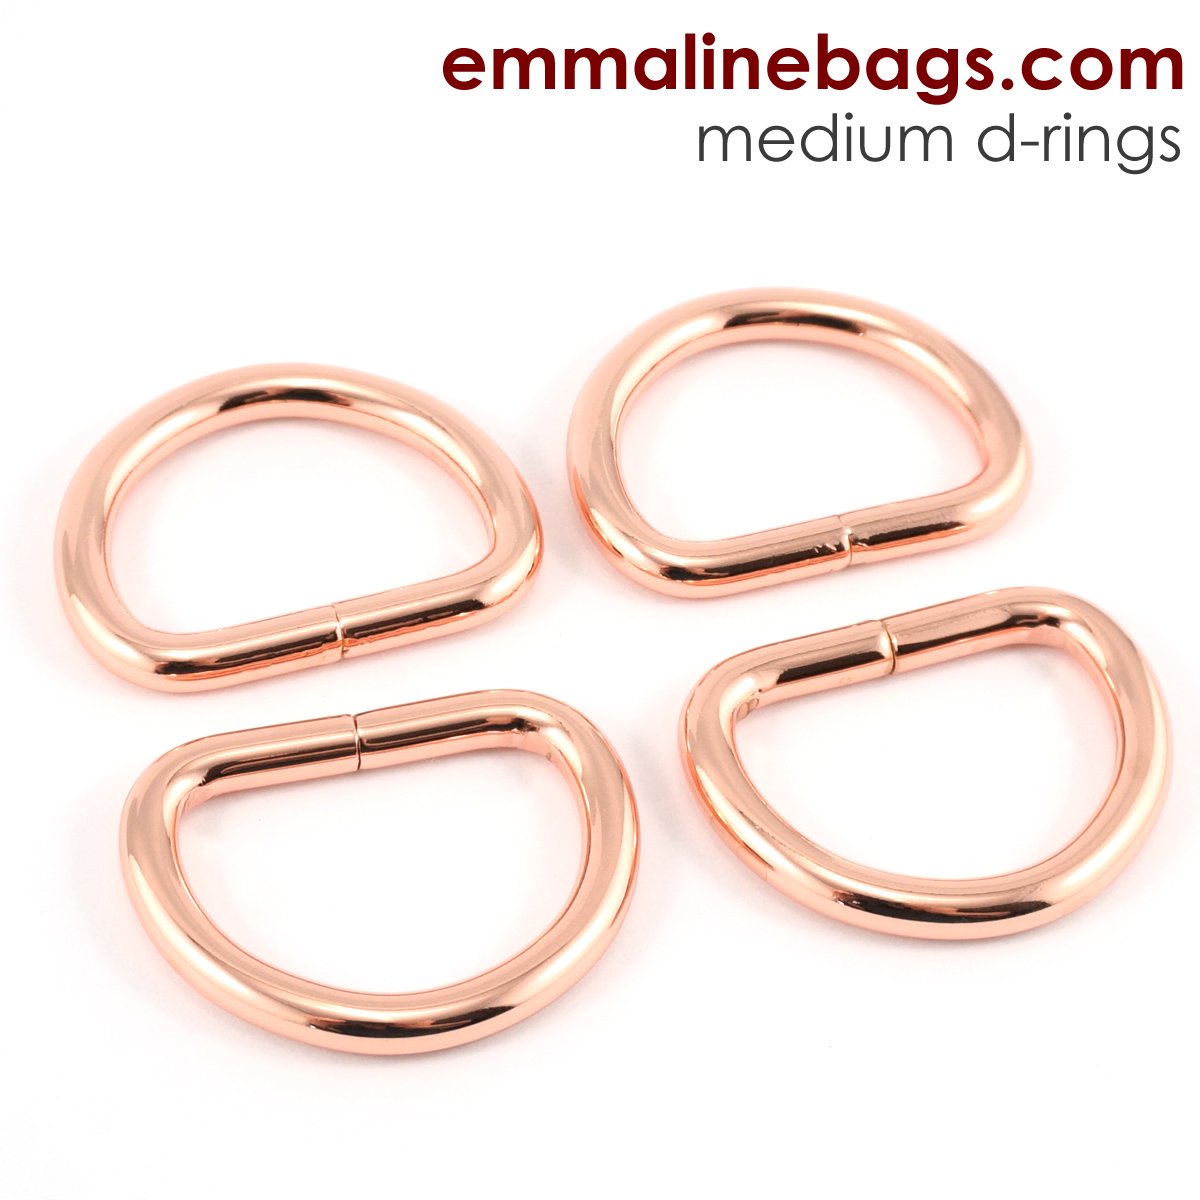 D-rings: (4 Pack)1" (25 mm) wide x 4 mm thickness (fits 1" strap) Copper